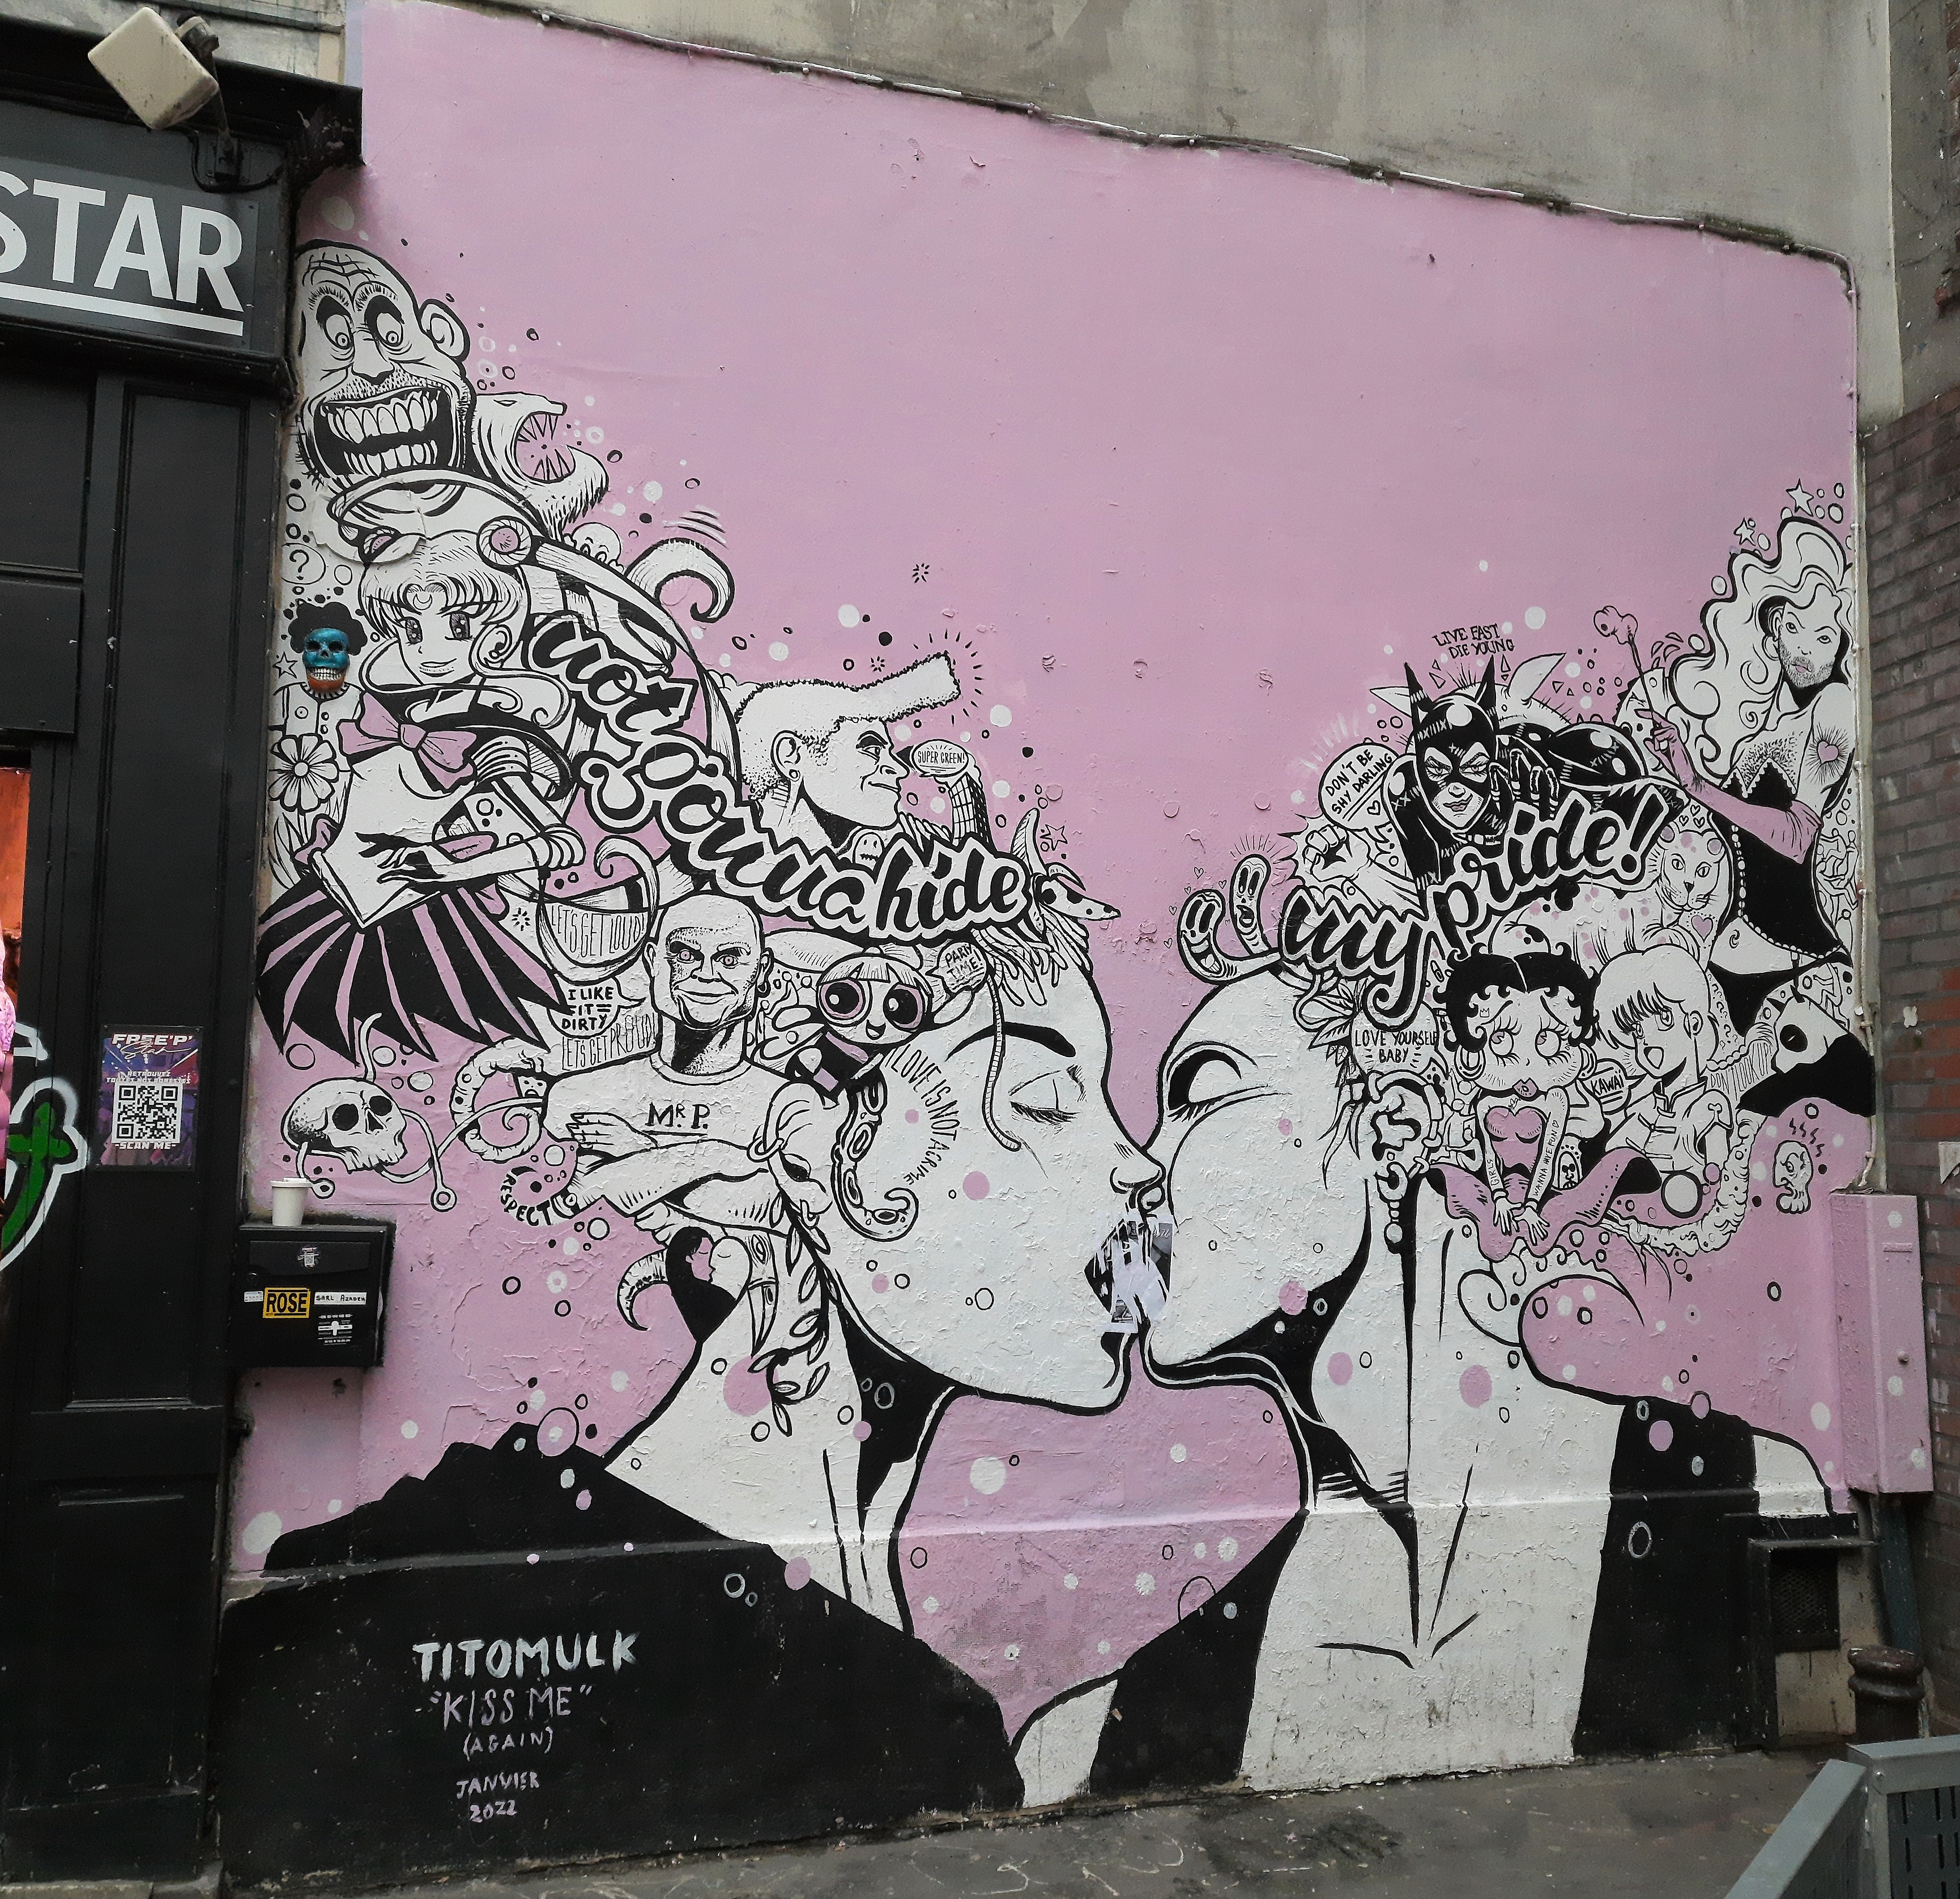 Graffiti 6539 TITOMULK by the artist Tito Mulk captured by Mephisroth in Paris France